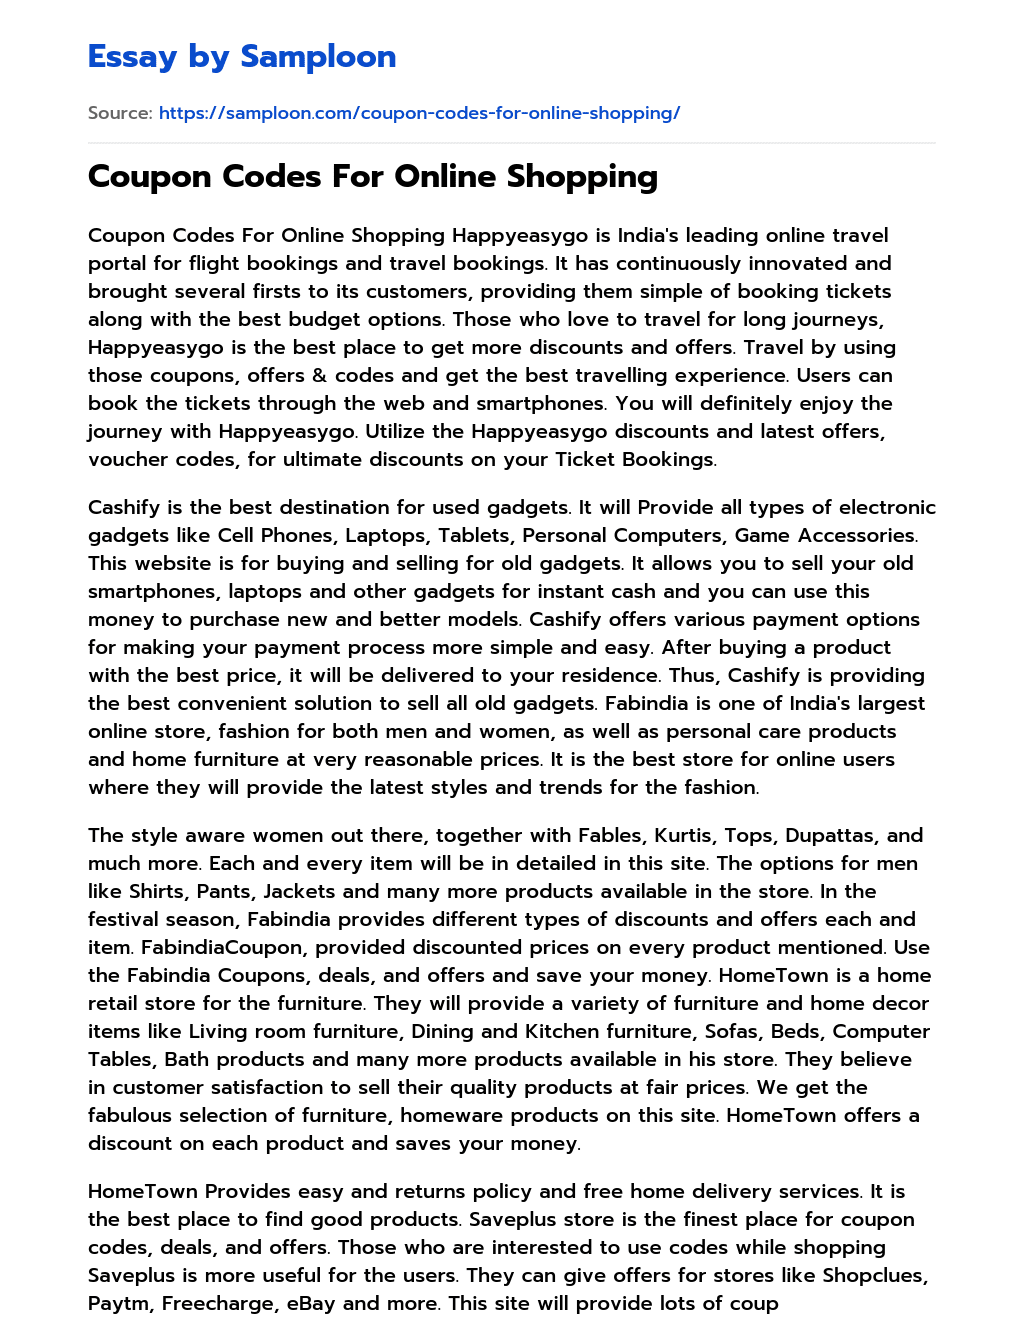 Coupon Codes For Online Shopping essay